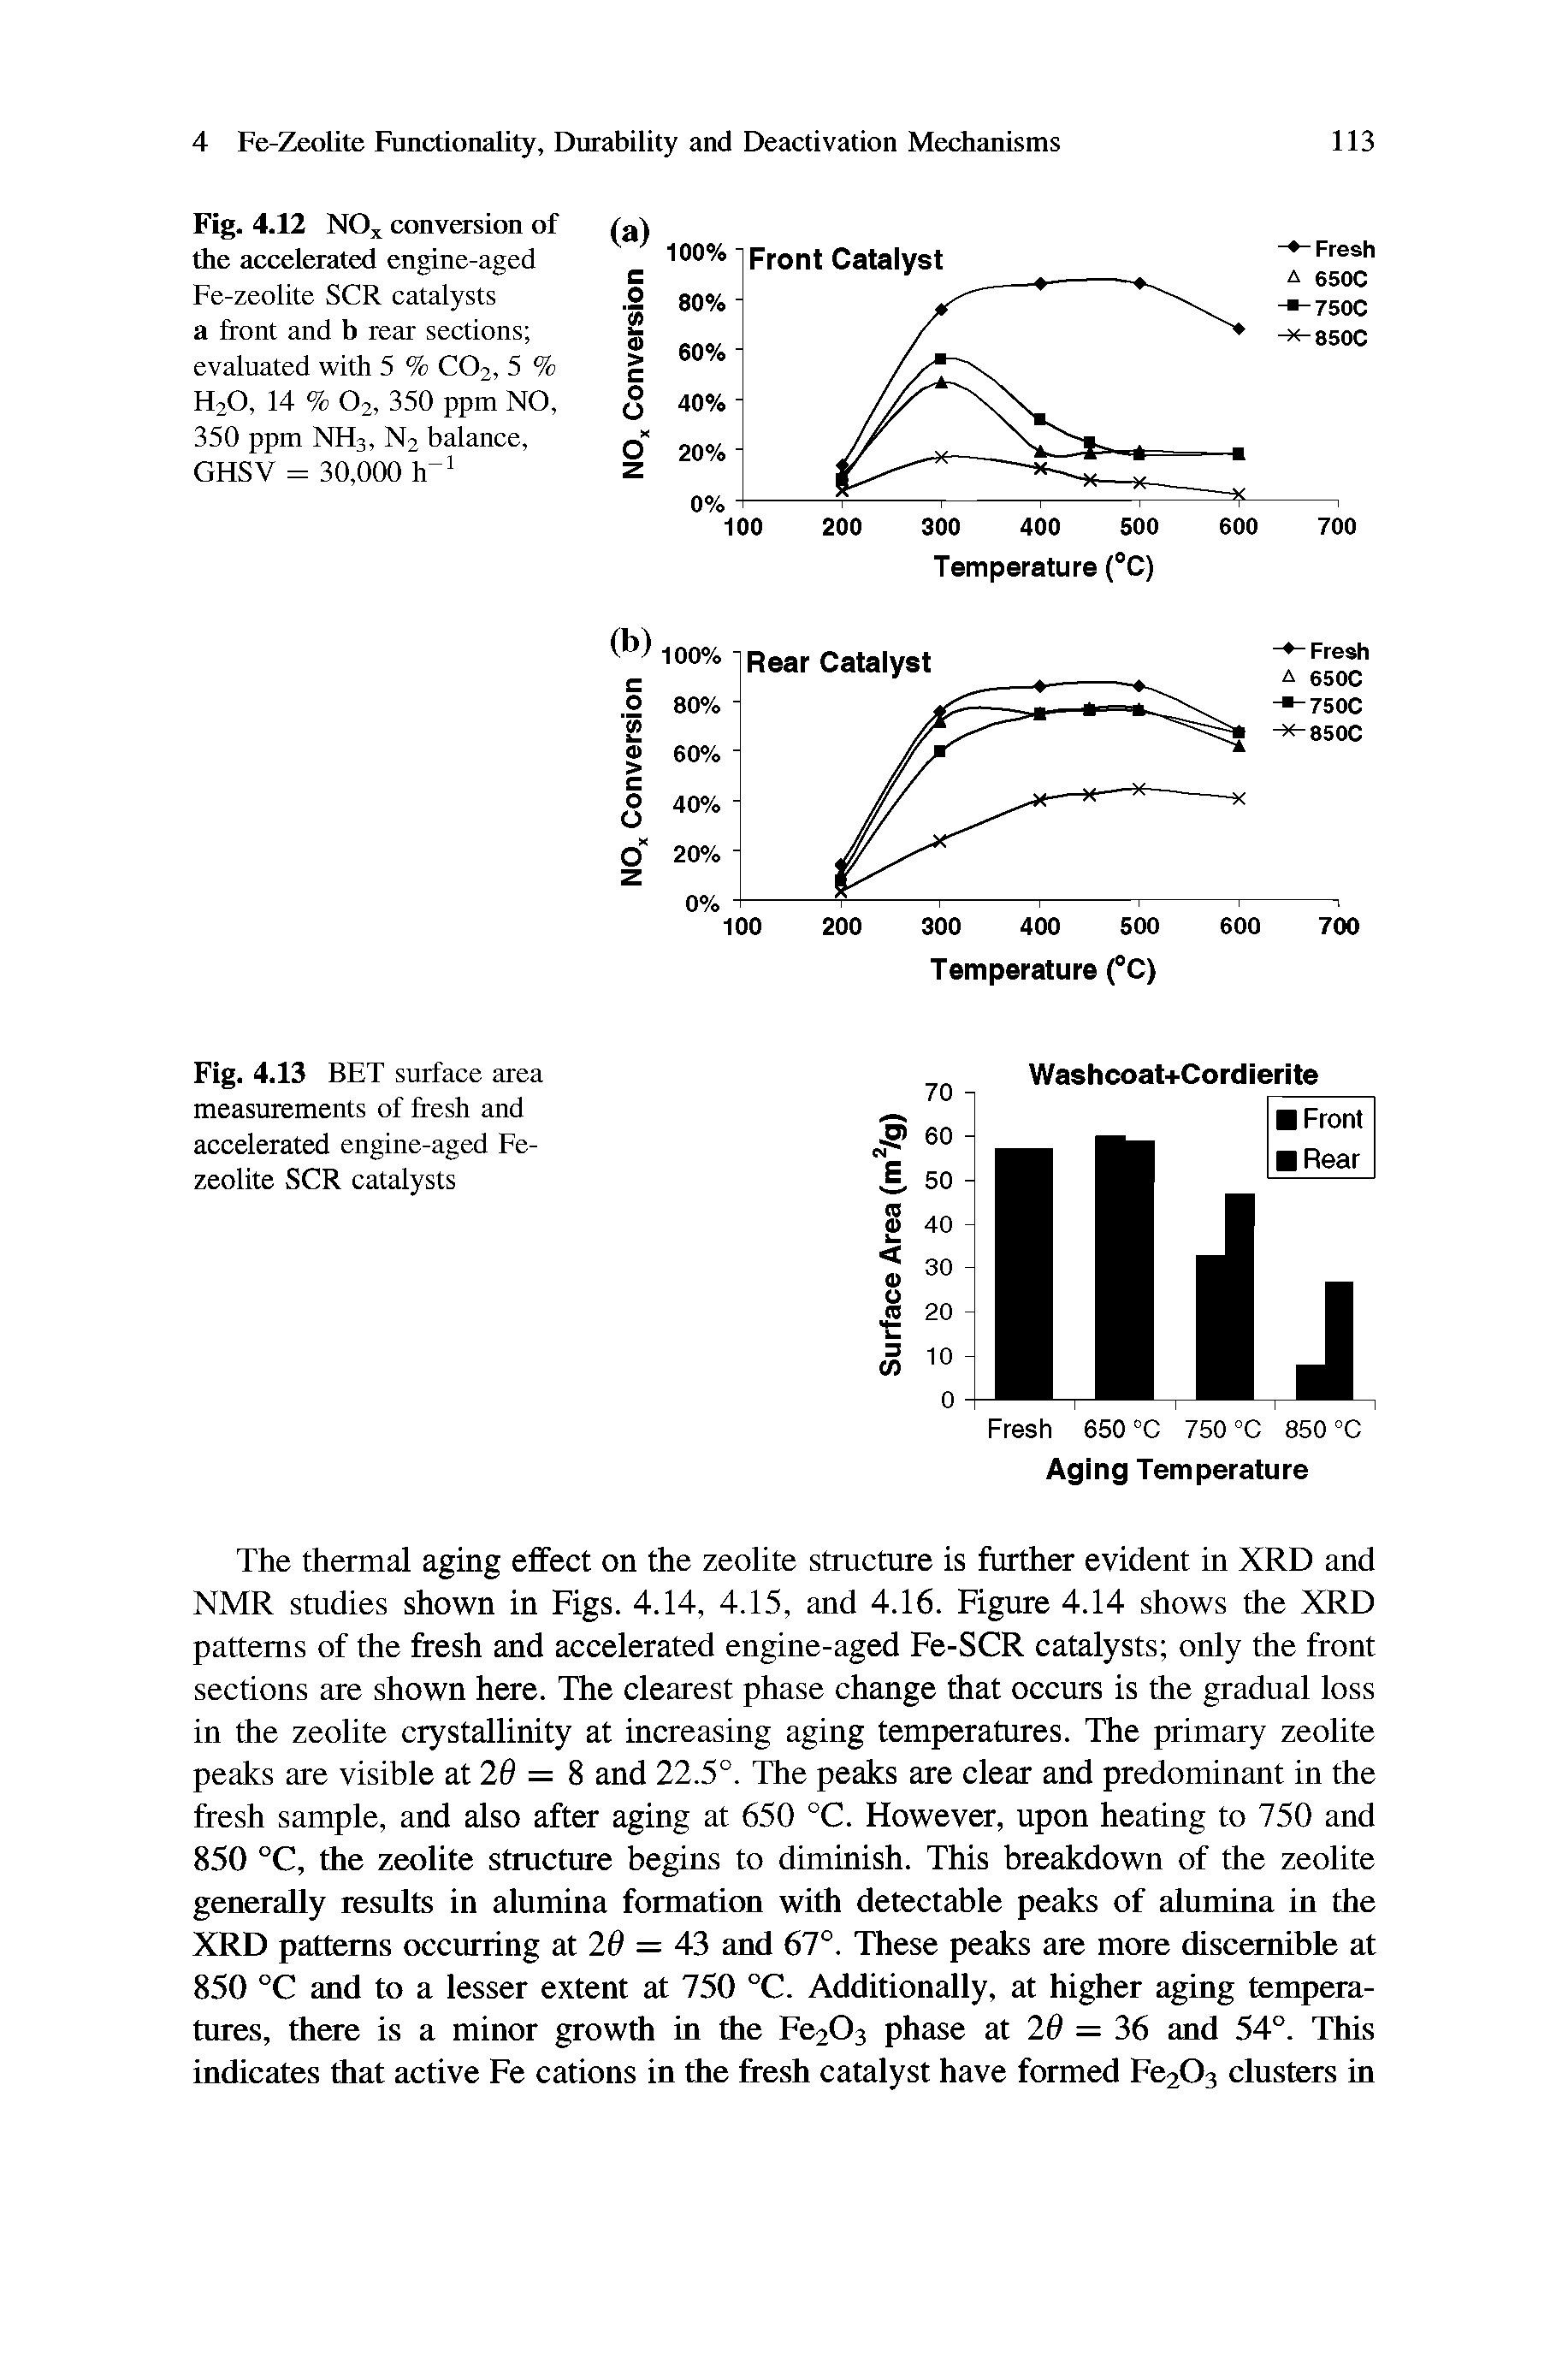 Fig. 4.12 NO,t conversion of the accelerated engine-aged Fe-zeolite SCR catalysts a front and b rear sections evaluated with 5 % CO2, 5 % H2O, 14 % O2, 350 ppm NO, 350 ppm NH3, N2 balance, GHSV = 30,000 h ...